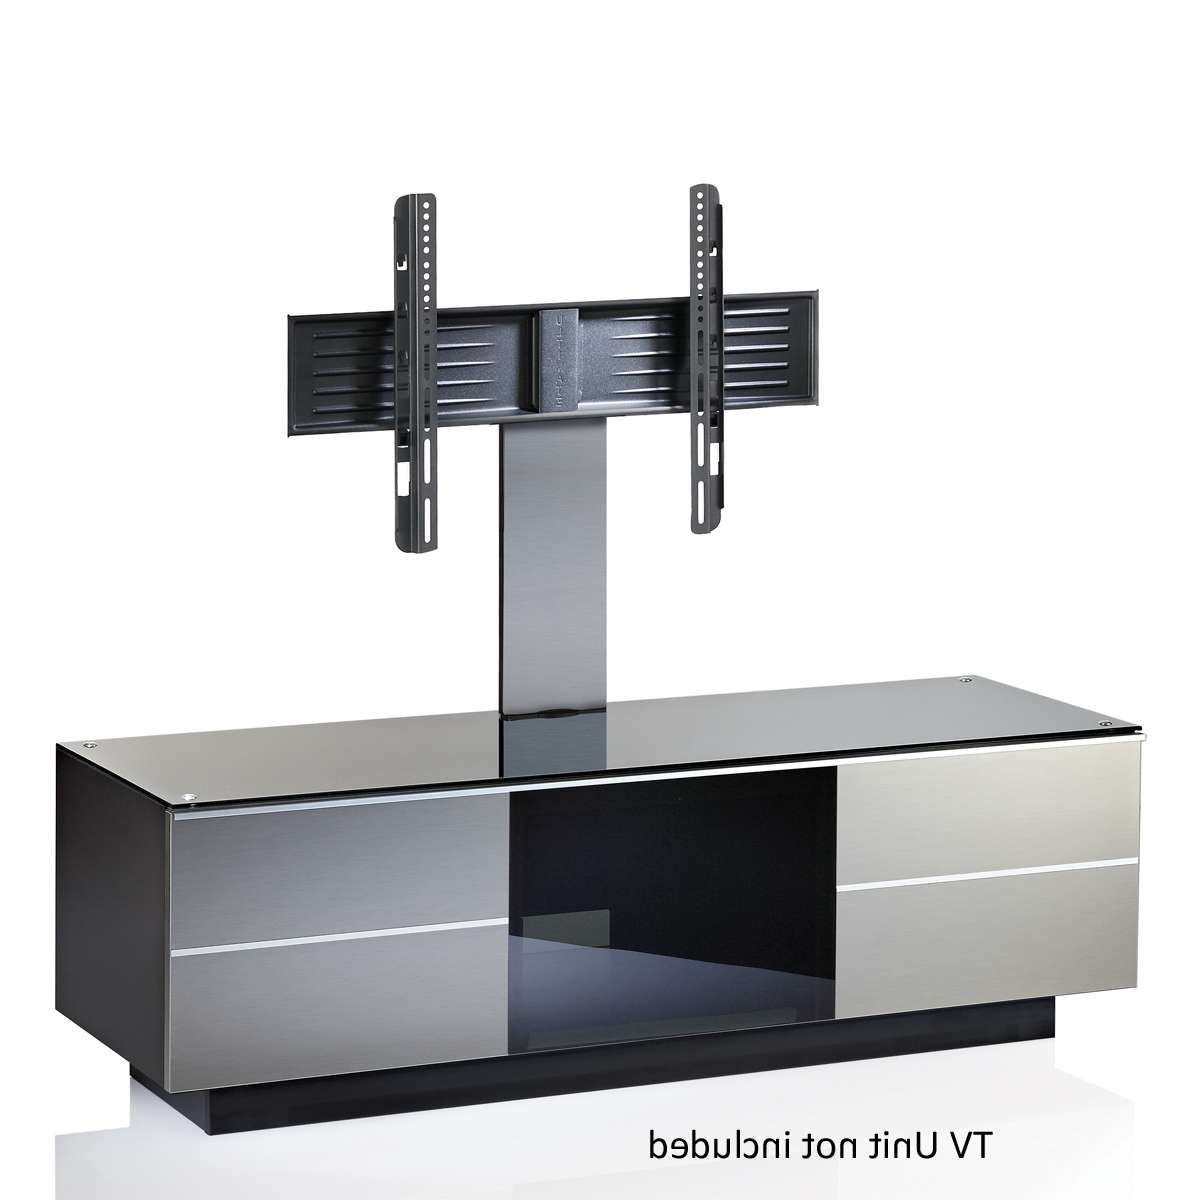 Inox G B 80 Inx Cantilever Tv Bracket,ukcf Ultimate,,uk Cf With Regard To Tv Stands Cantilever (Gallery 8 of 15)